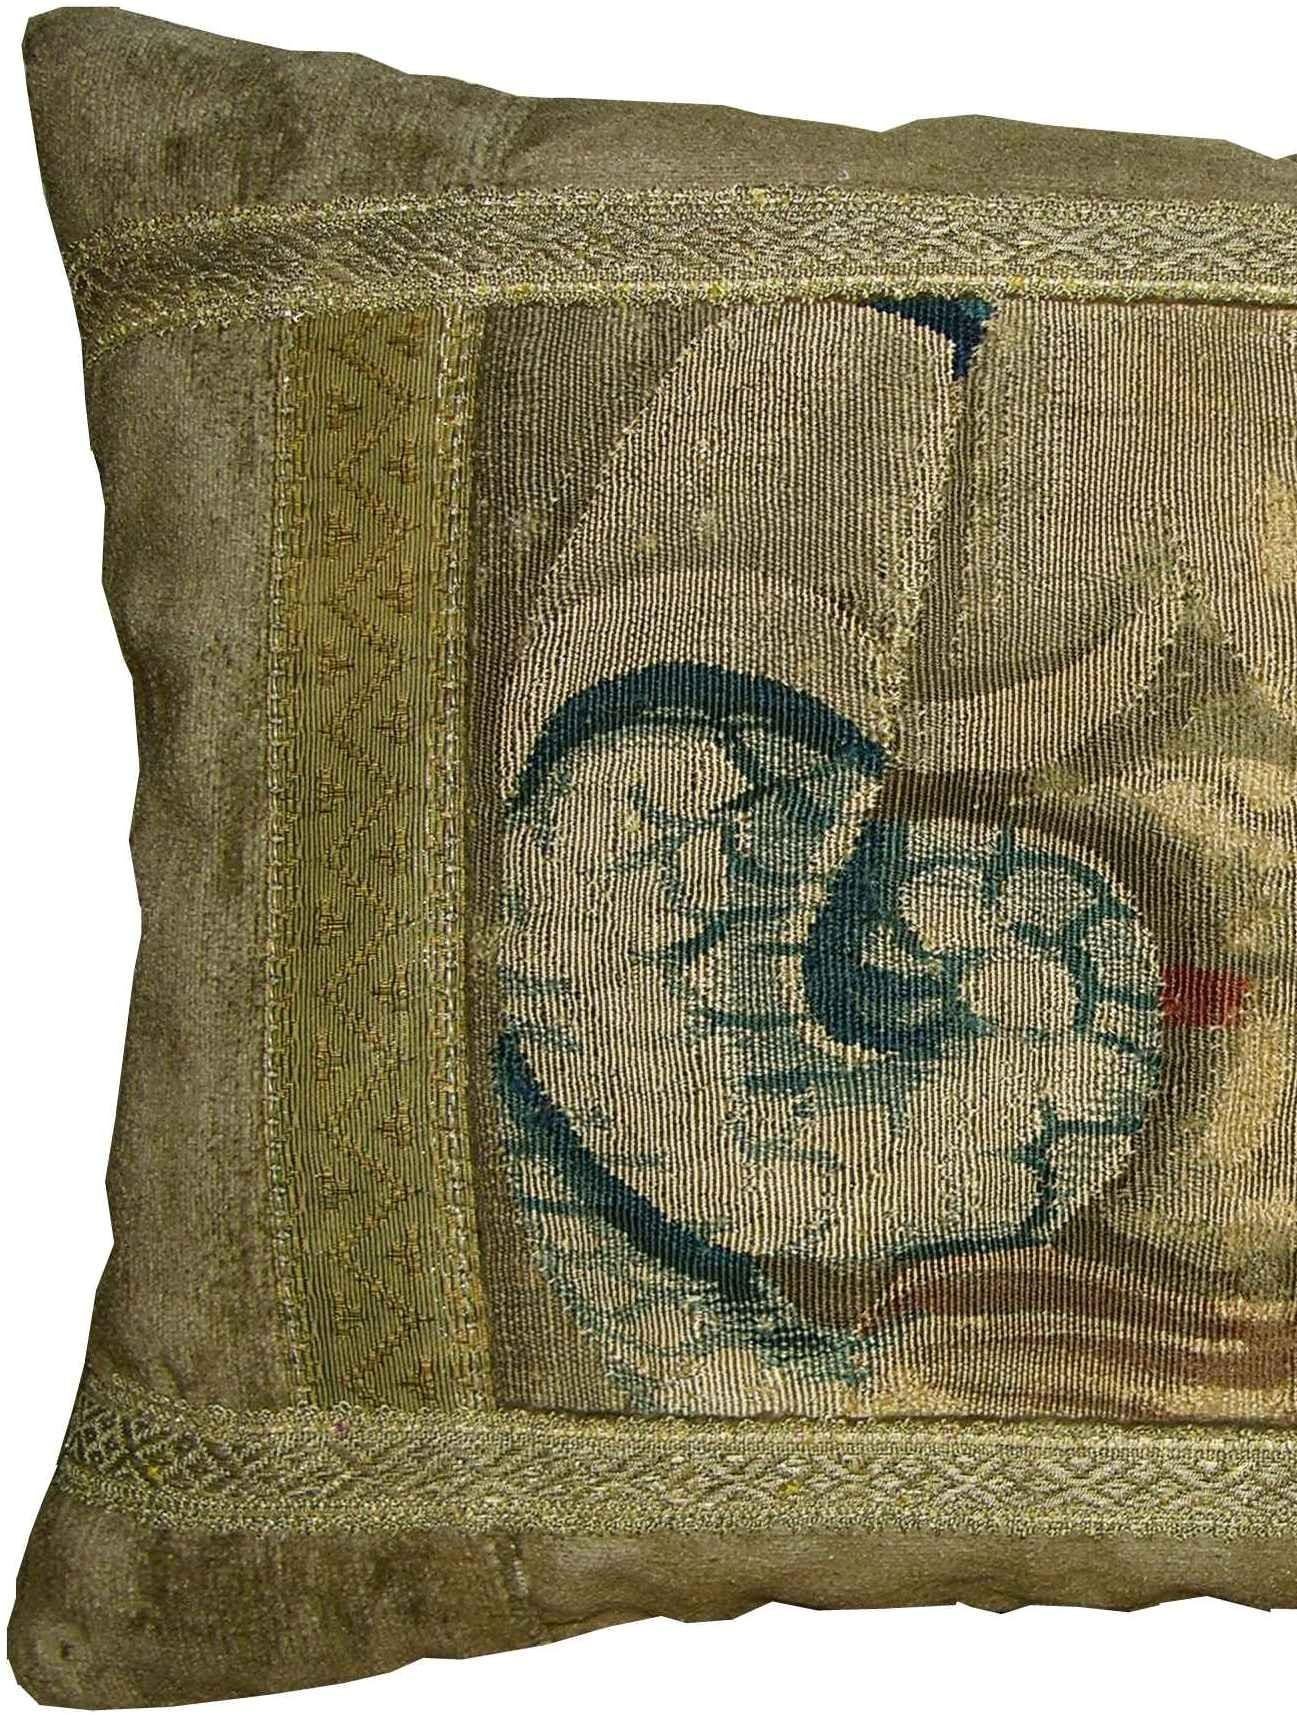 Antique Brussels Tapestry Pillow 17th Century